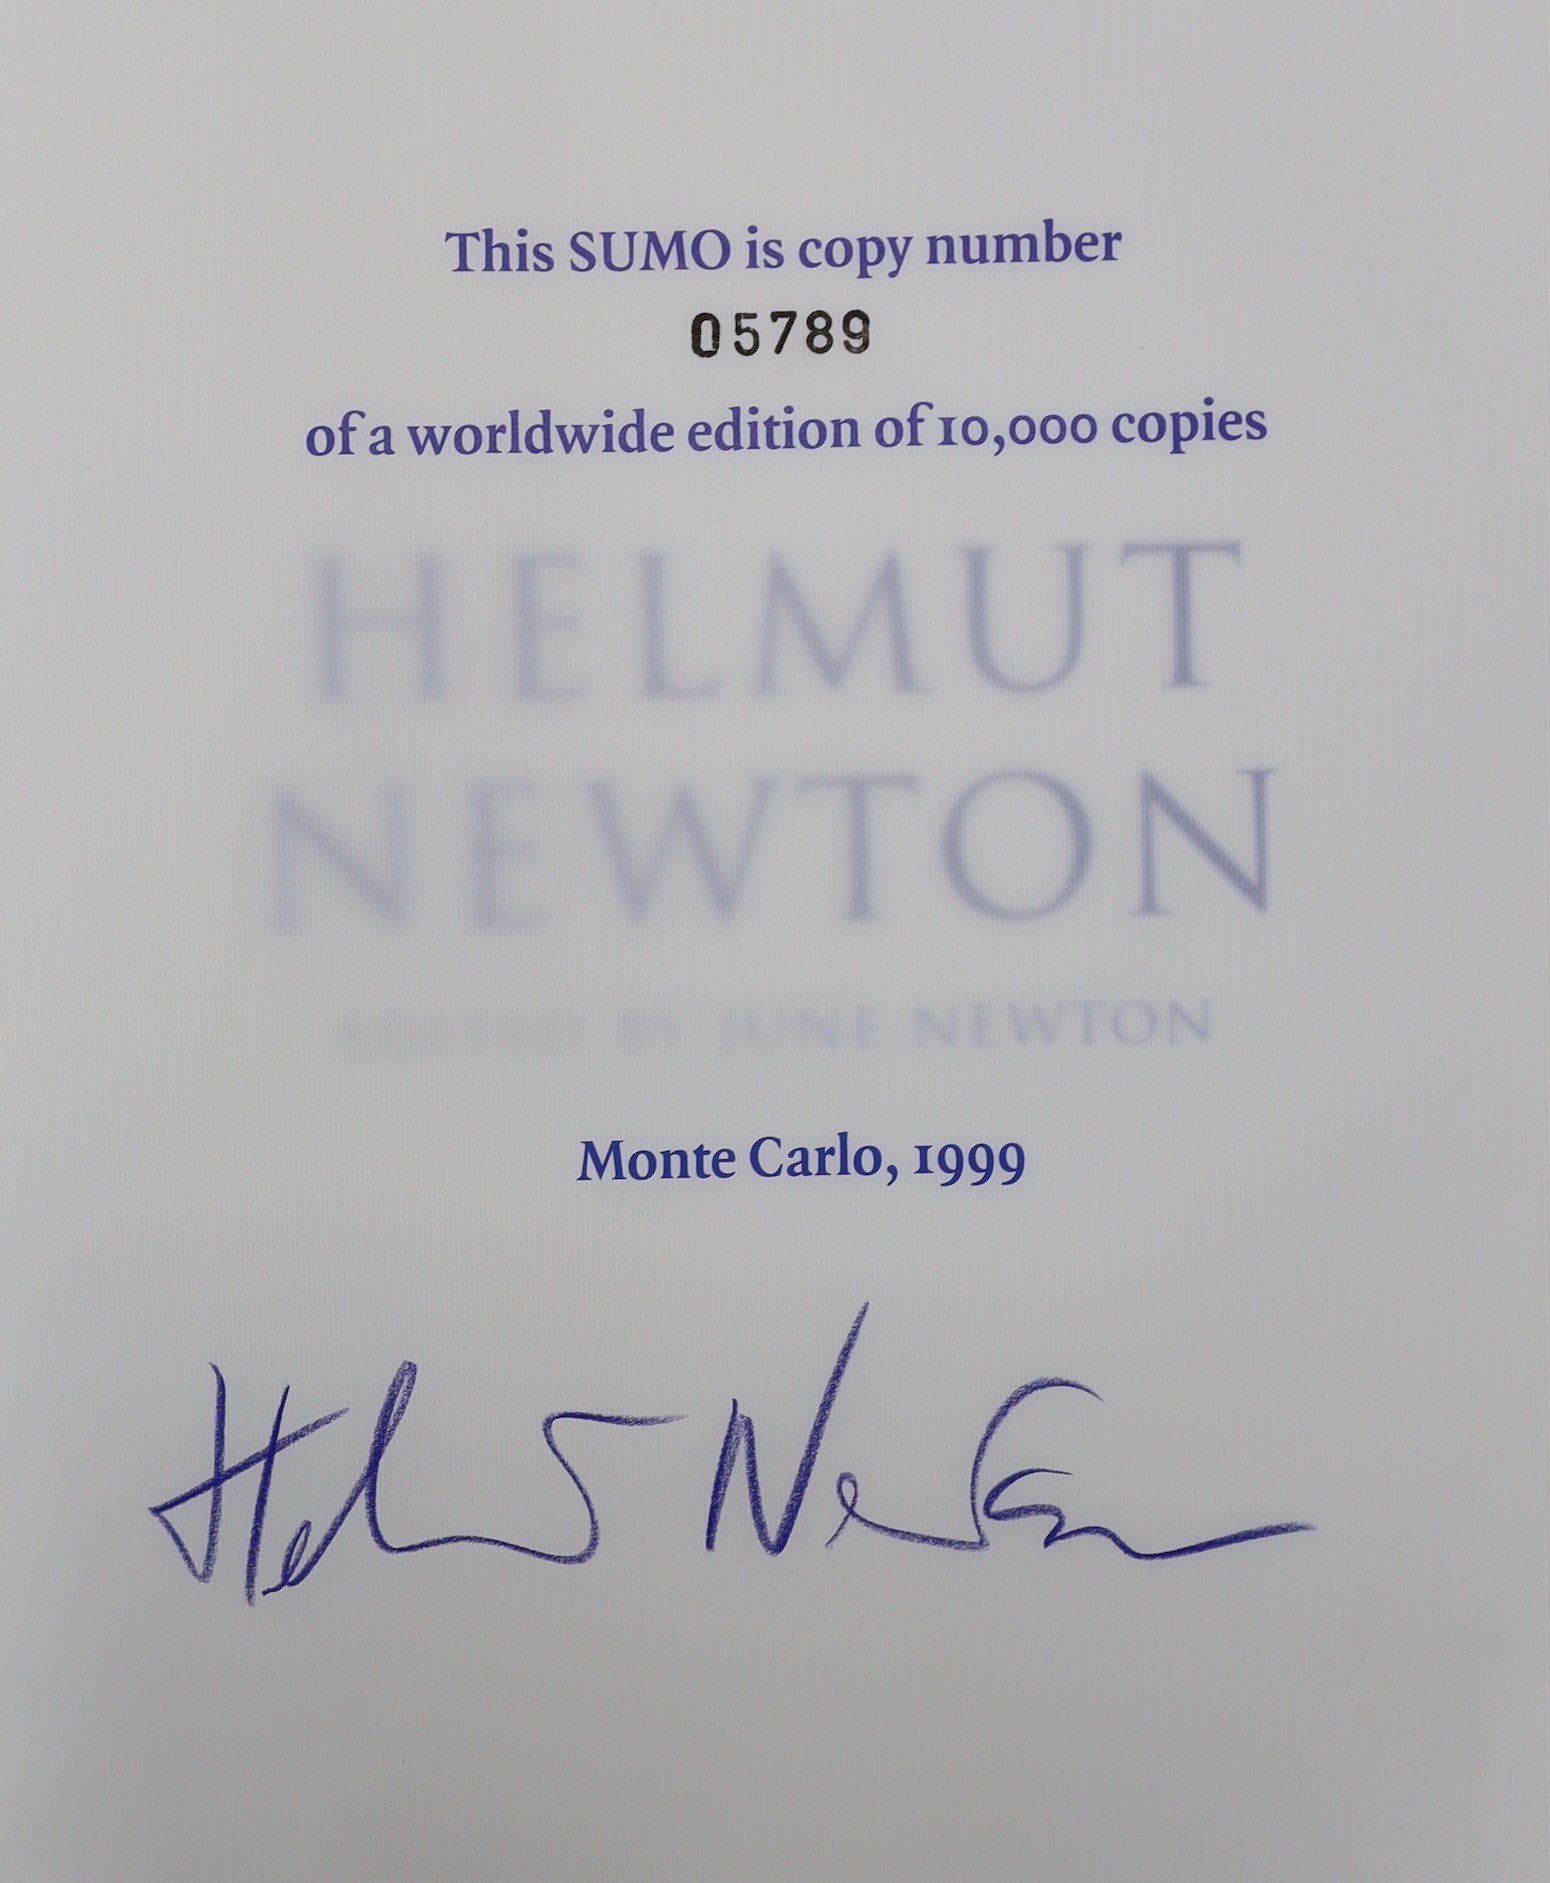 Newton, Helmut - Sumo, one of 10,000, signed, folio, original cloth in d/j, with 464 pp., 400 plates, Taschen, Monte Carlo, 1999, with chrome stand designed by Philippe Starck, together with original shipping box.